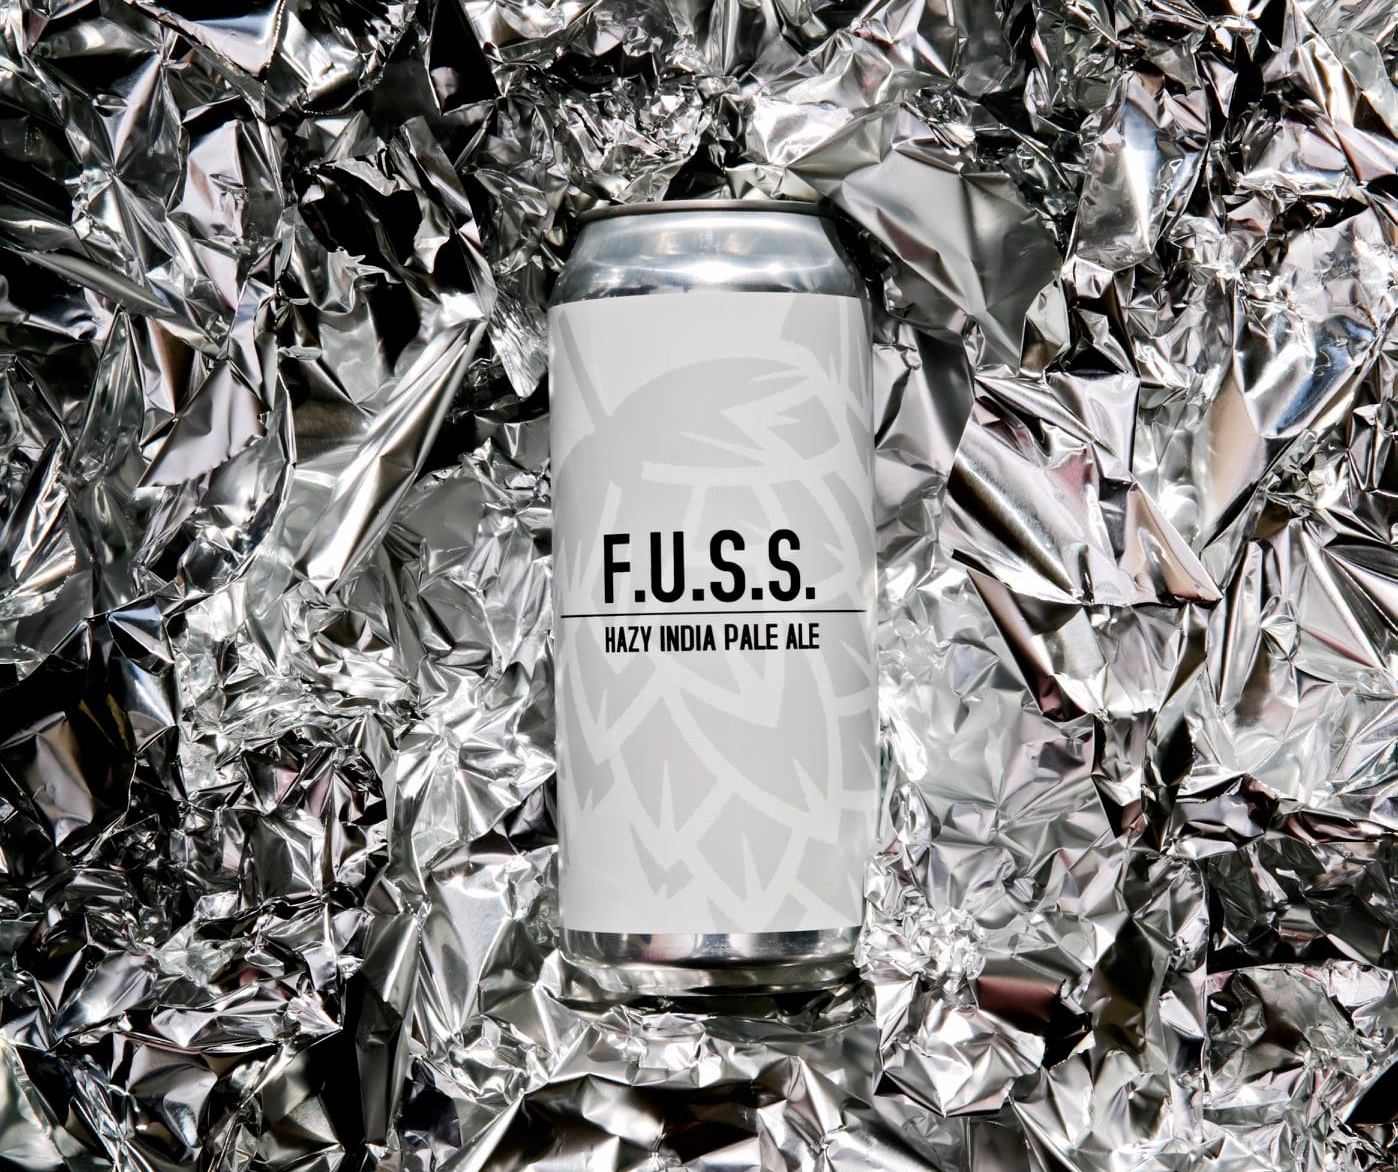 Can of Fuss, with a background of crinkled tin foil